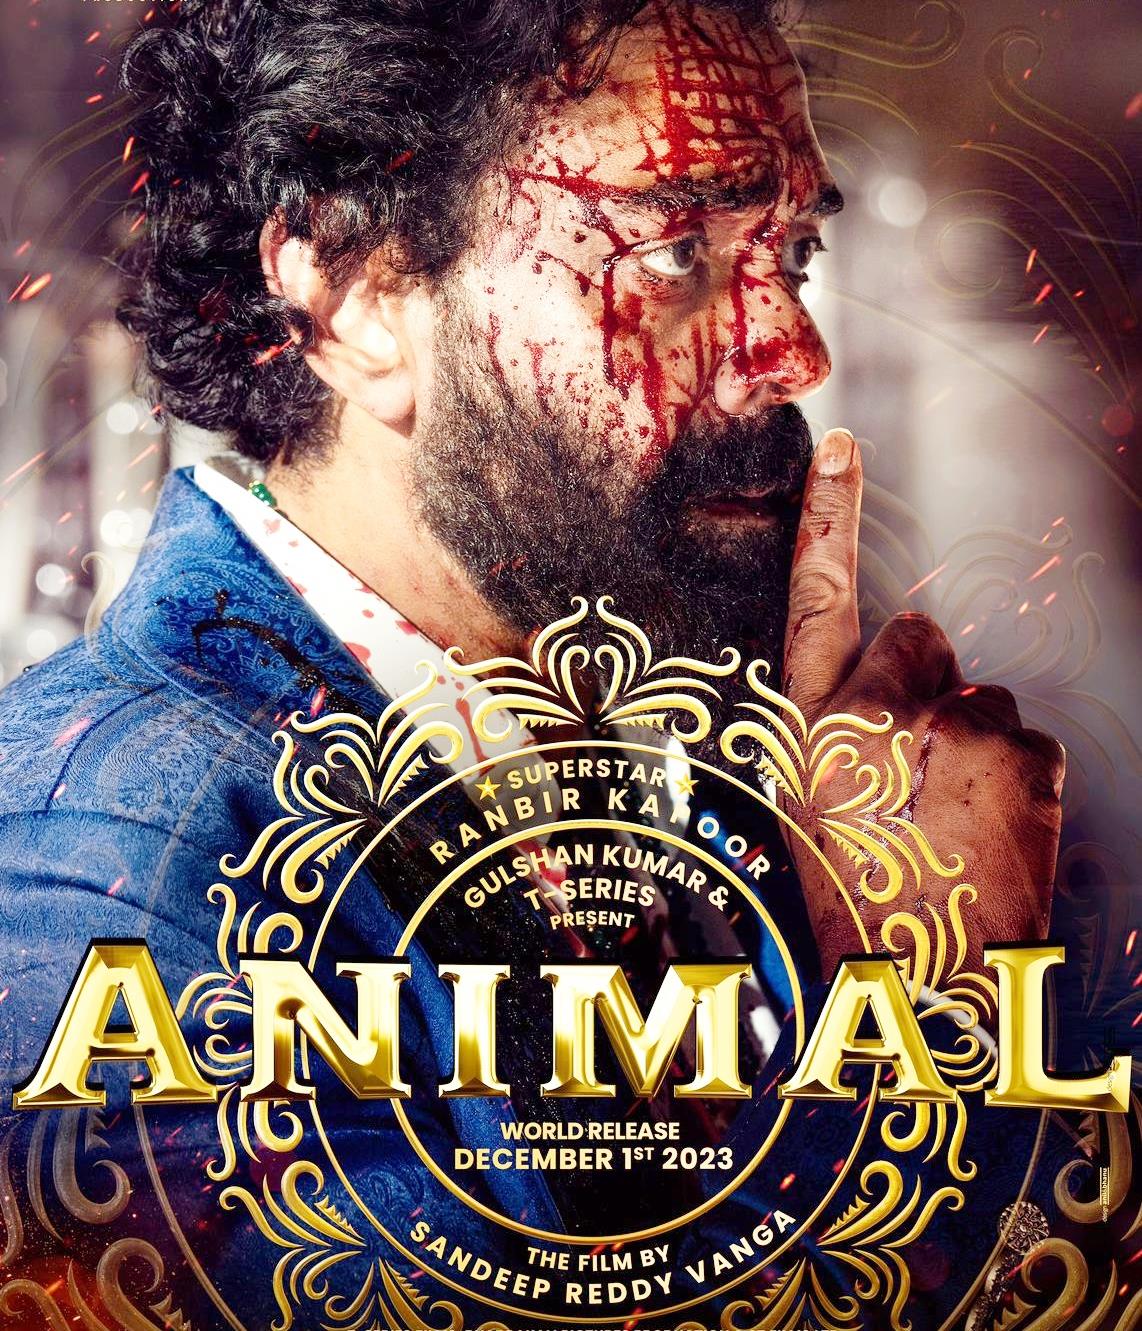 Bobby Deol’S ‘Bloodied’ Look As Ferocious Antagonist In ‘Animal’ Revealed